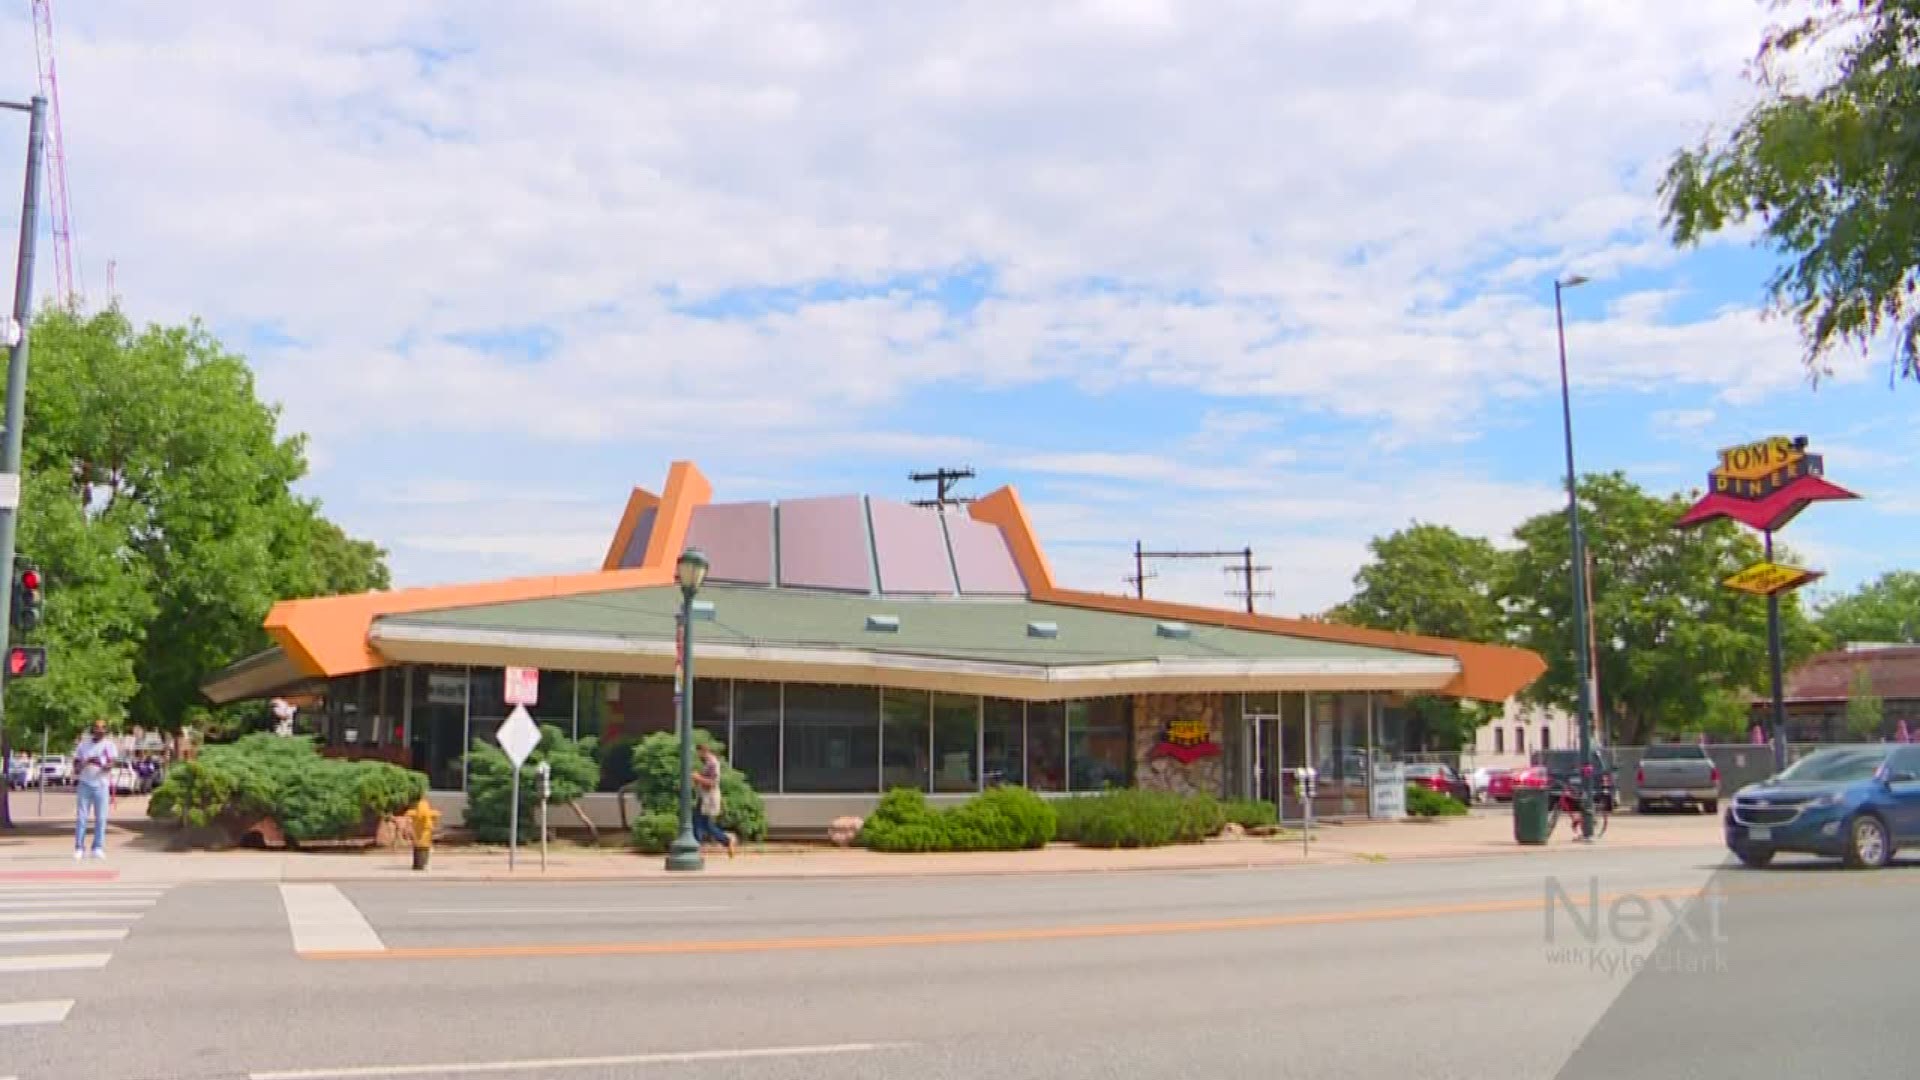 The debate over the future of Tom's Diner has a lot of people raising questions about the whole historical landmark process.